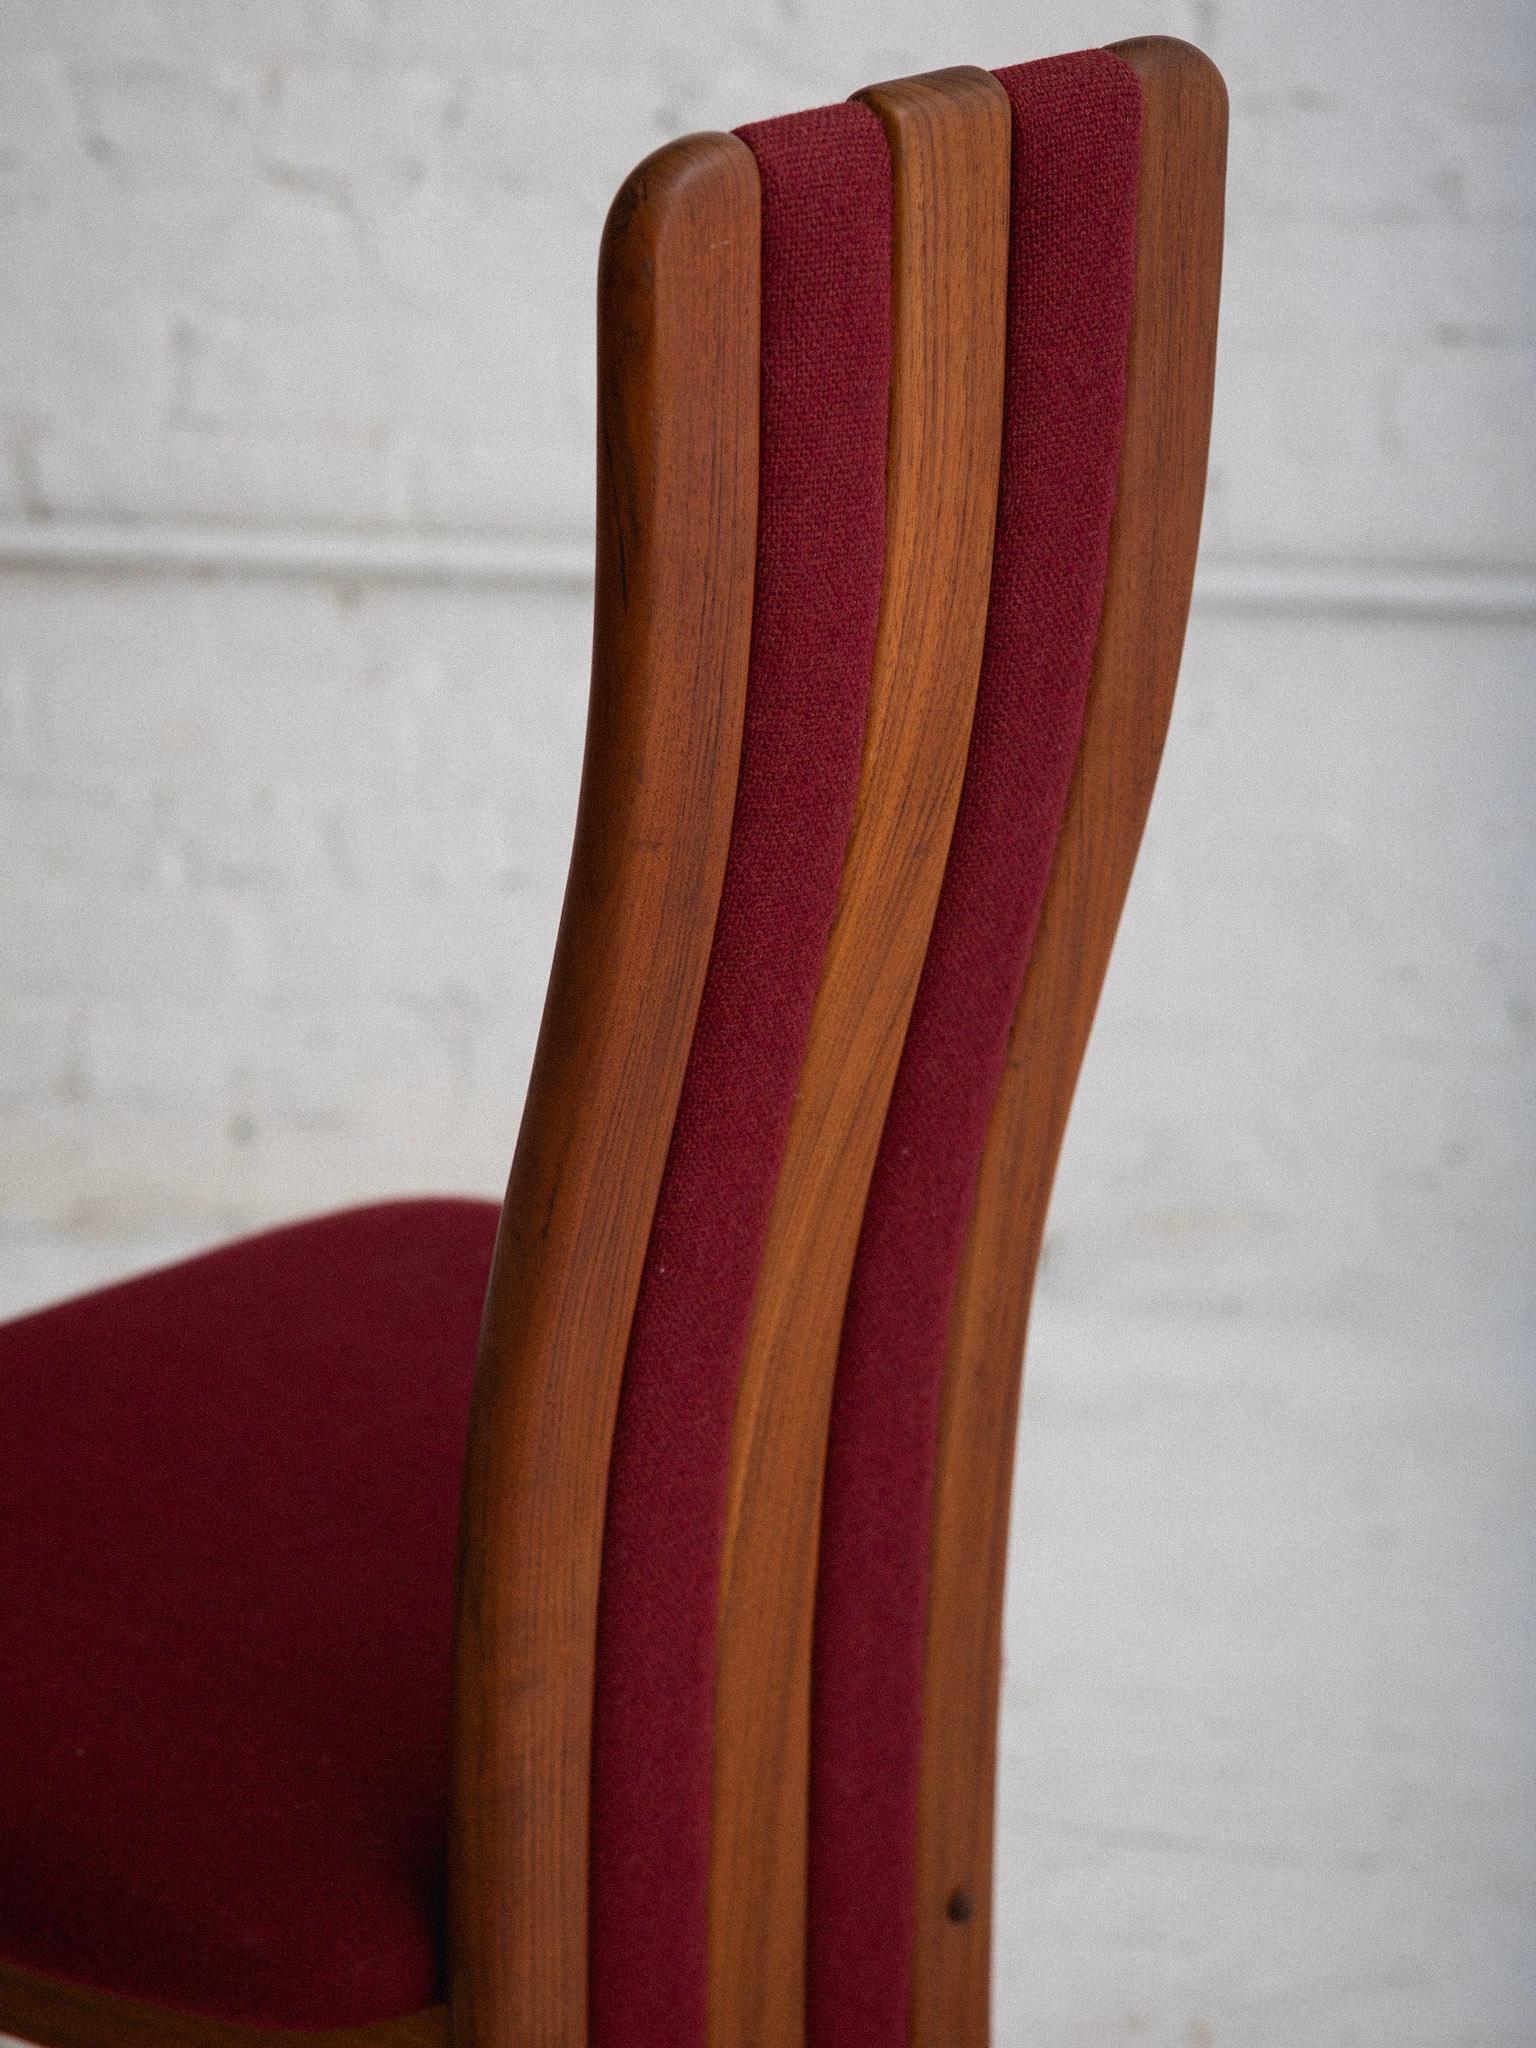 Post Modern Sculpted Teak Dining Chairs by Benny Linden - a Set of 6 3